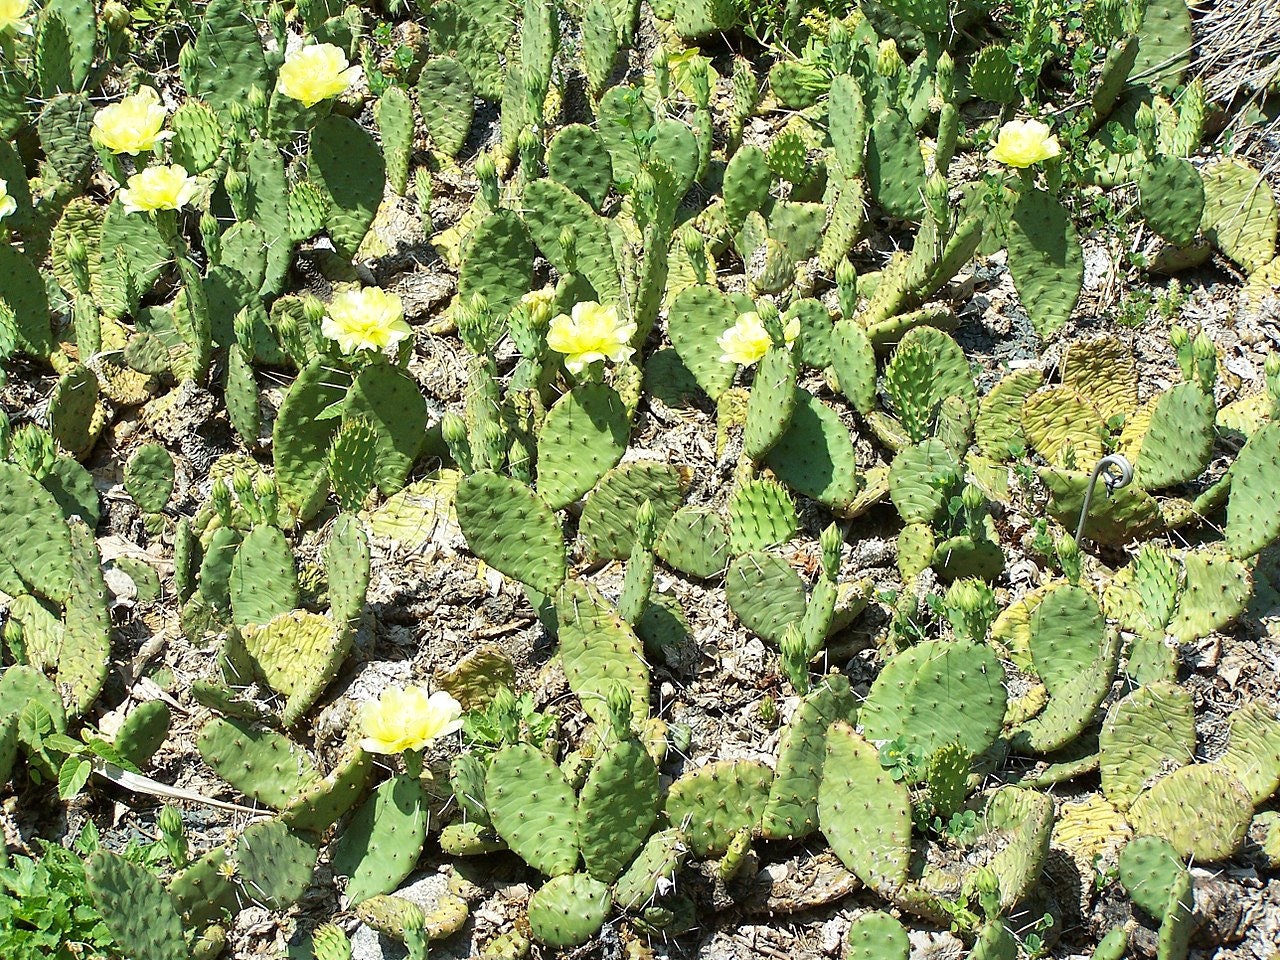 Devil's-tongue Cactus - Opuntia humifusa Eastern prickly pear - Indian fig - Great outdoor cactus nopales - Size Options